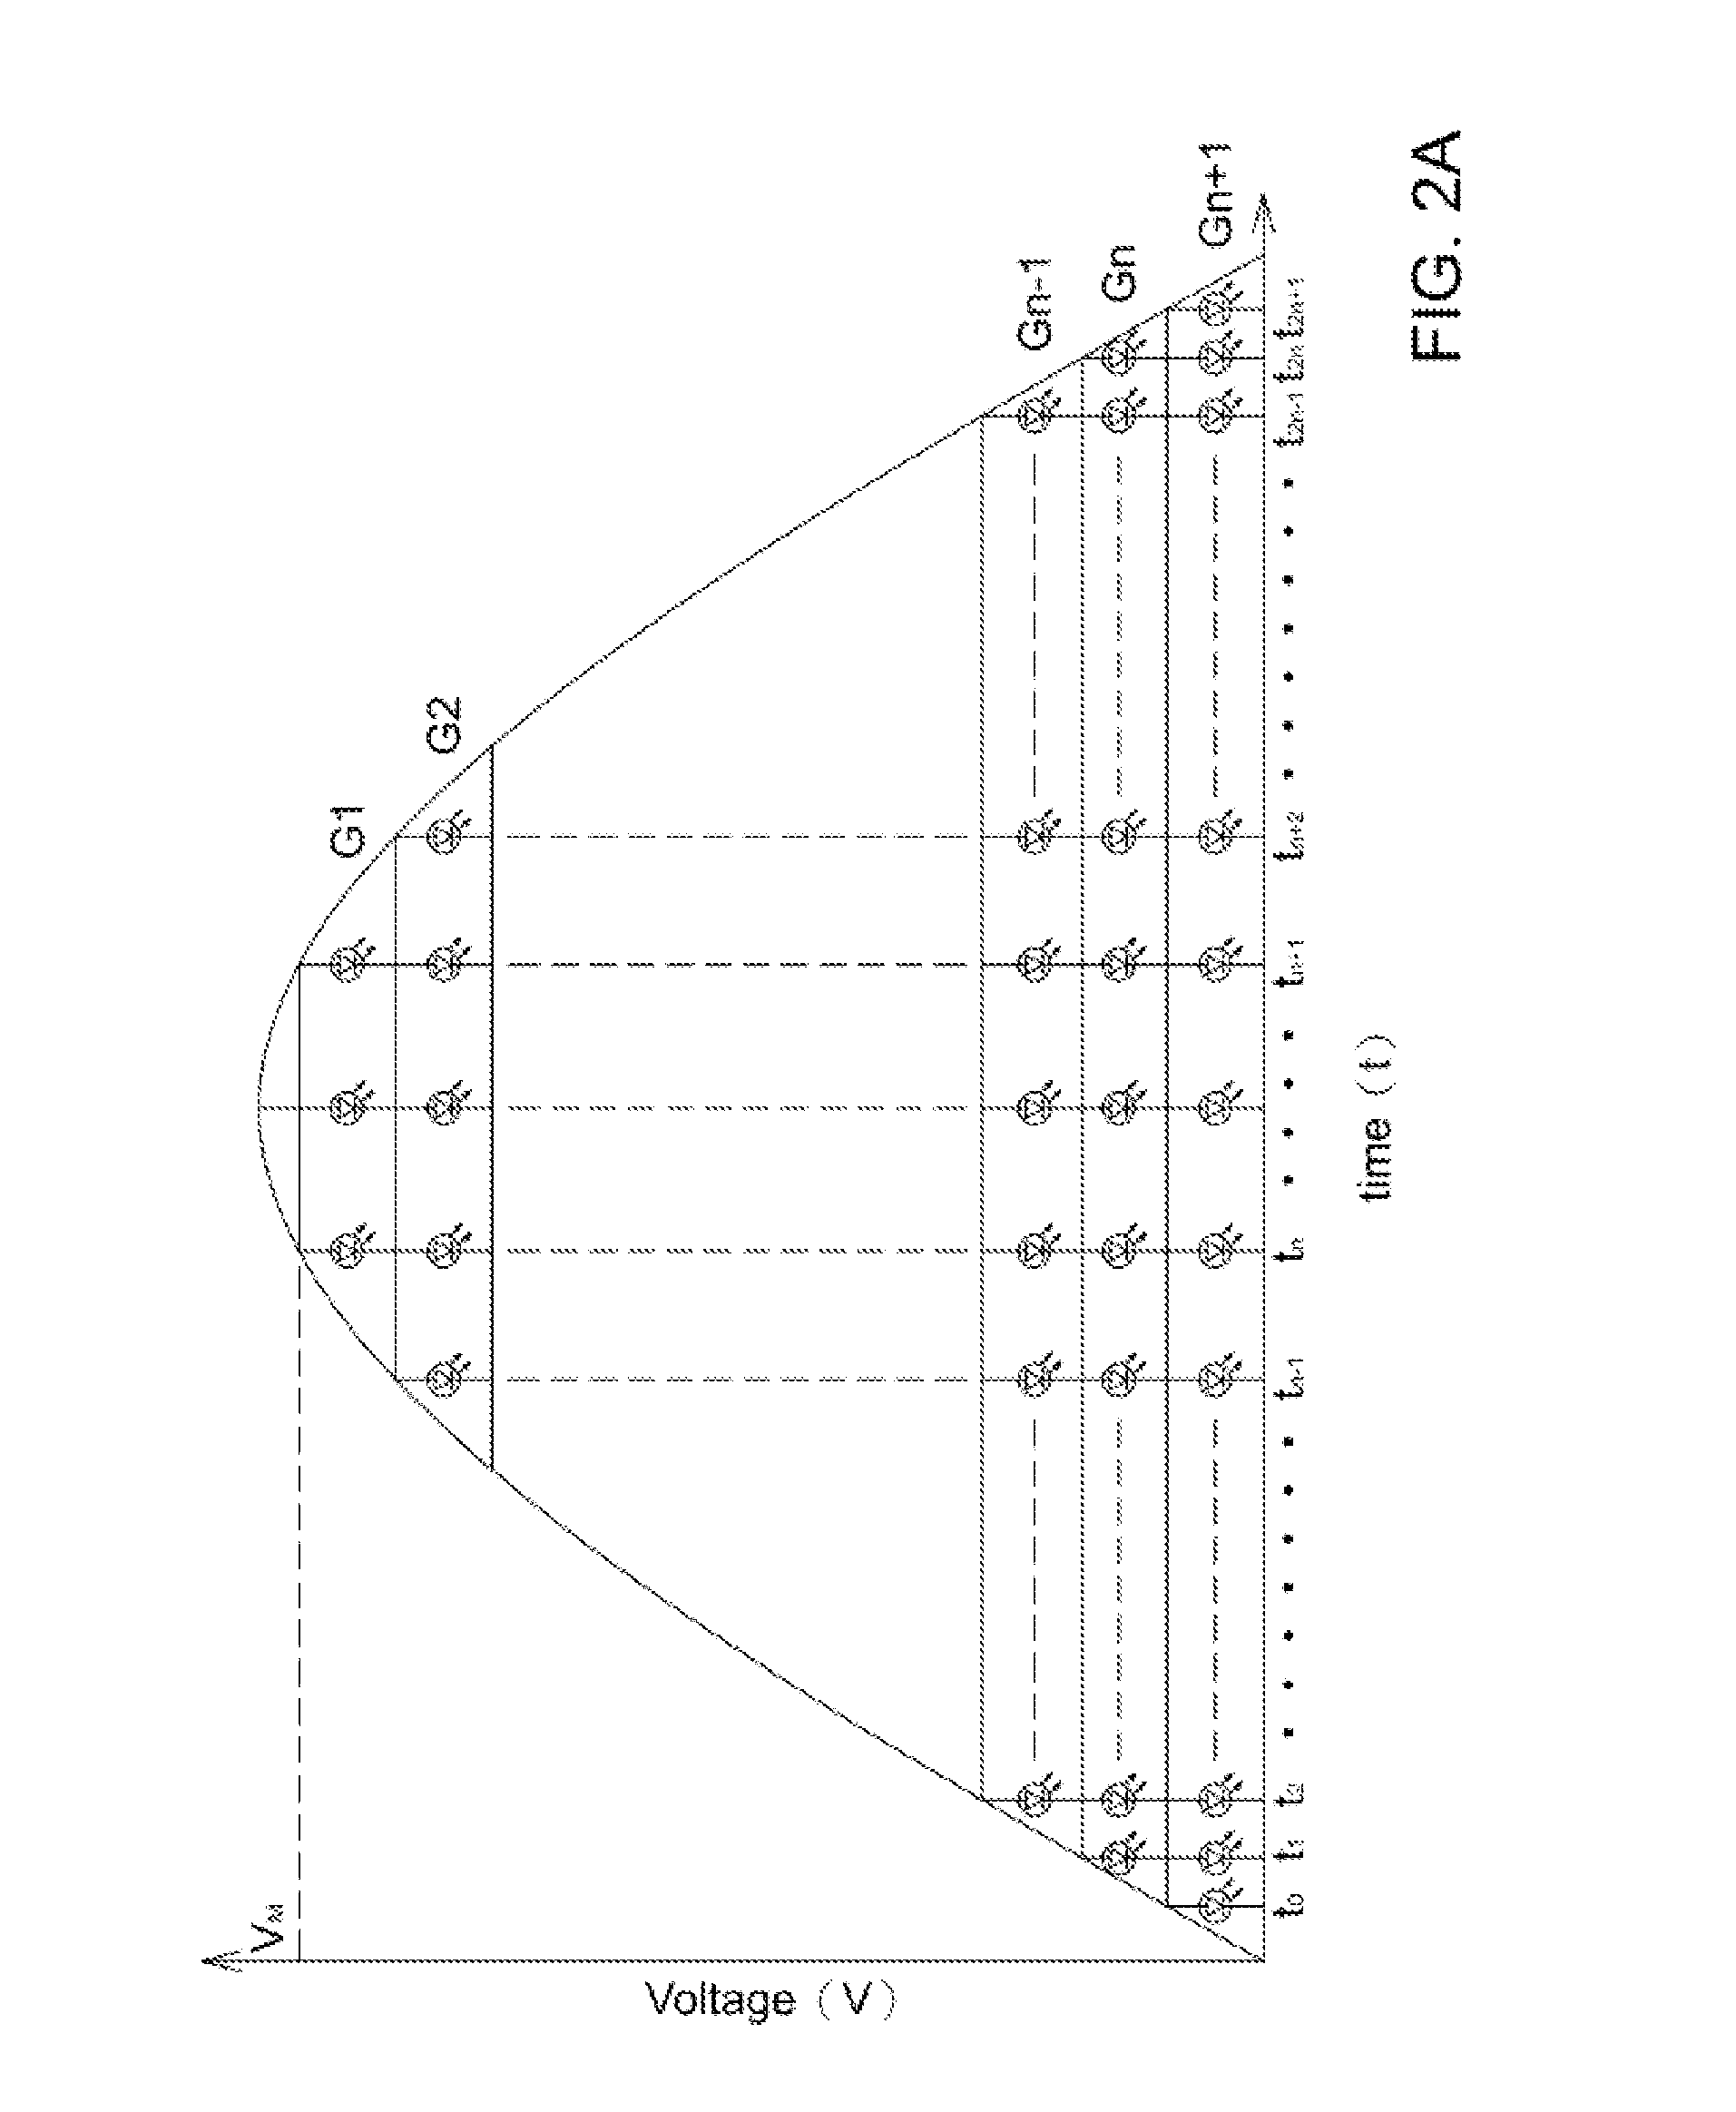 Electronic control gears for LED light engine and application thereof